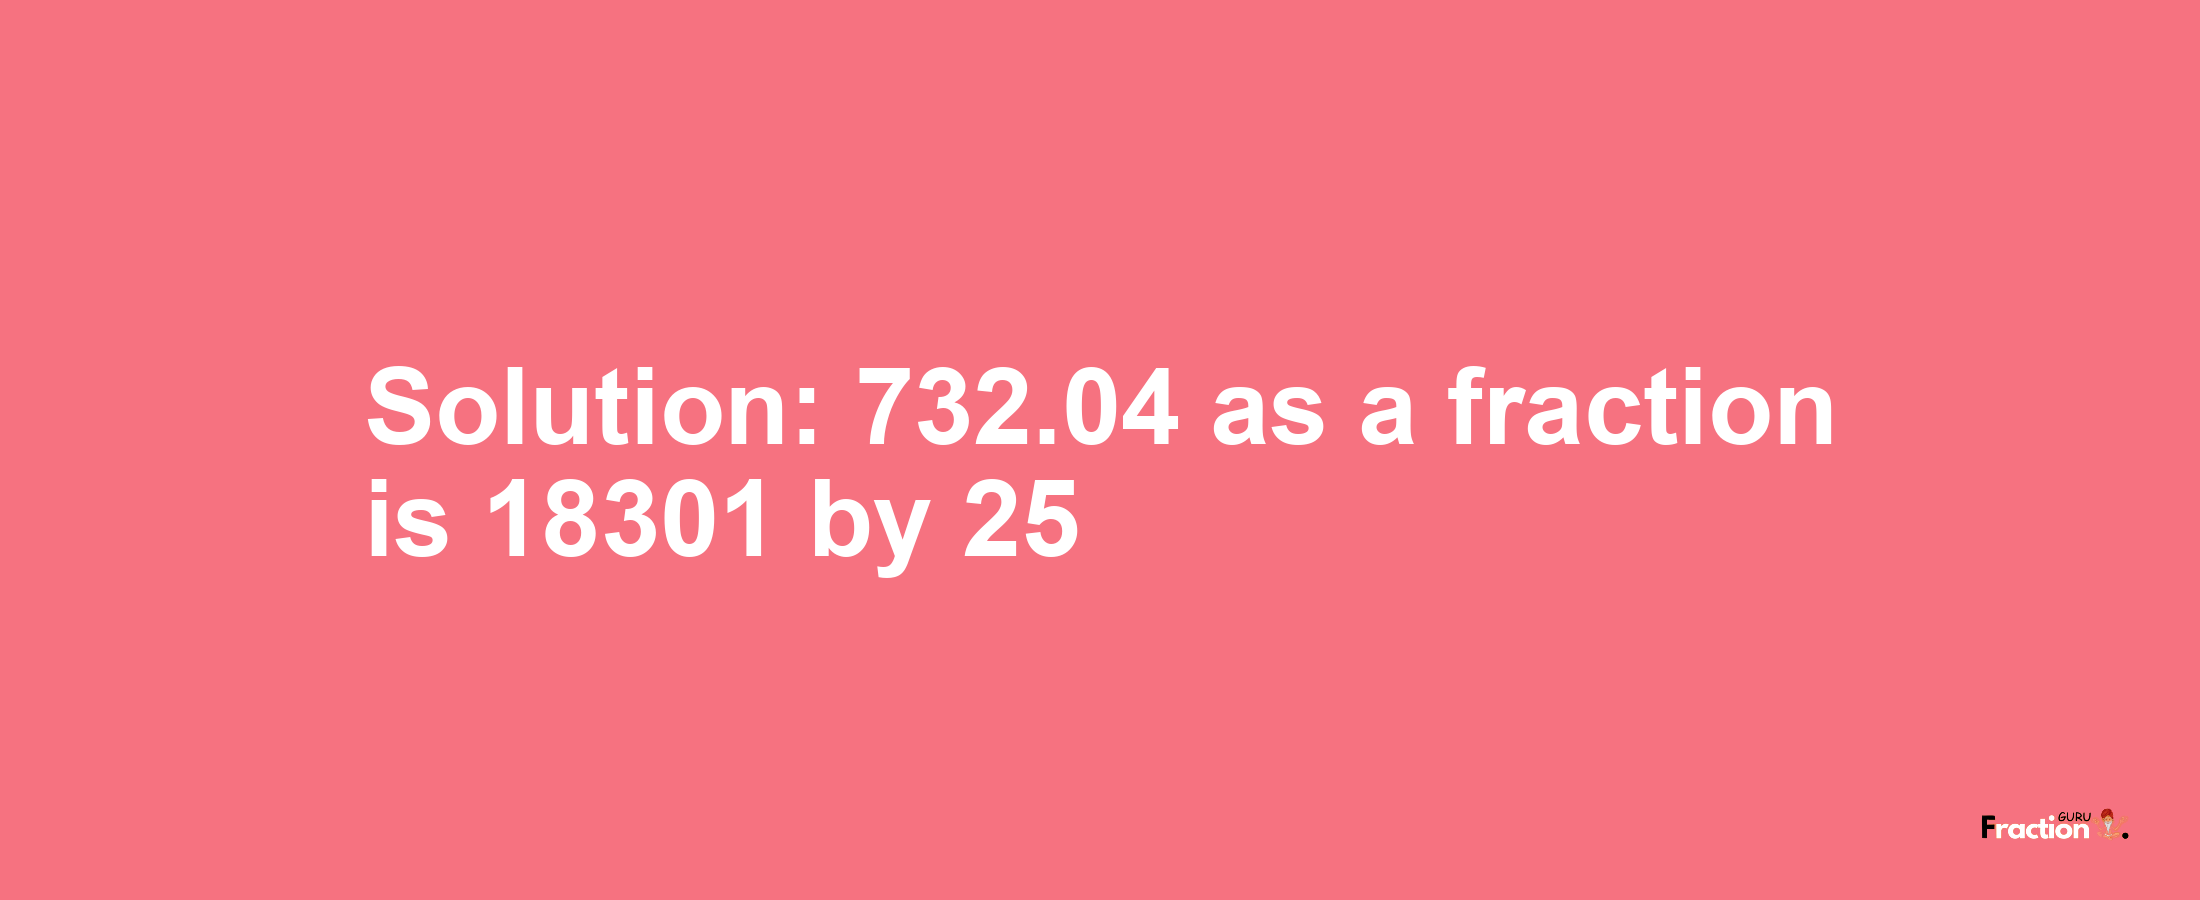 Solution:732.04 as a fraction is 18301/25